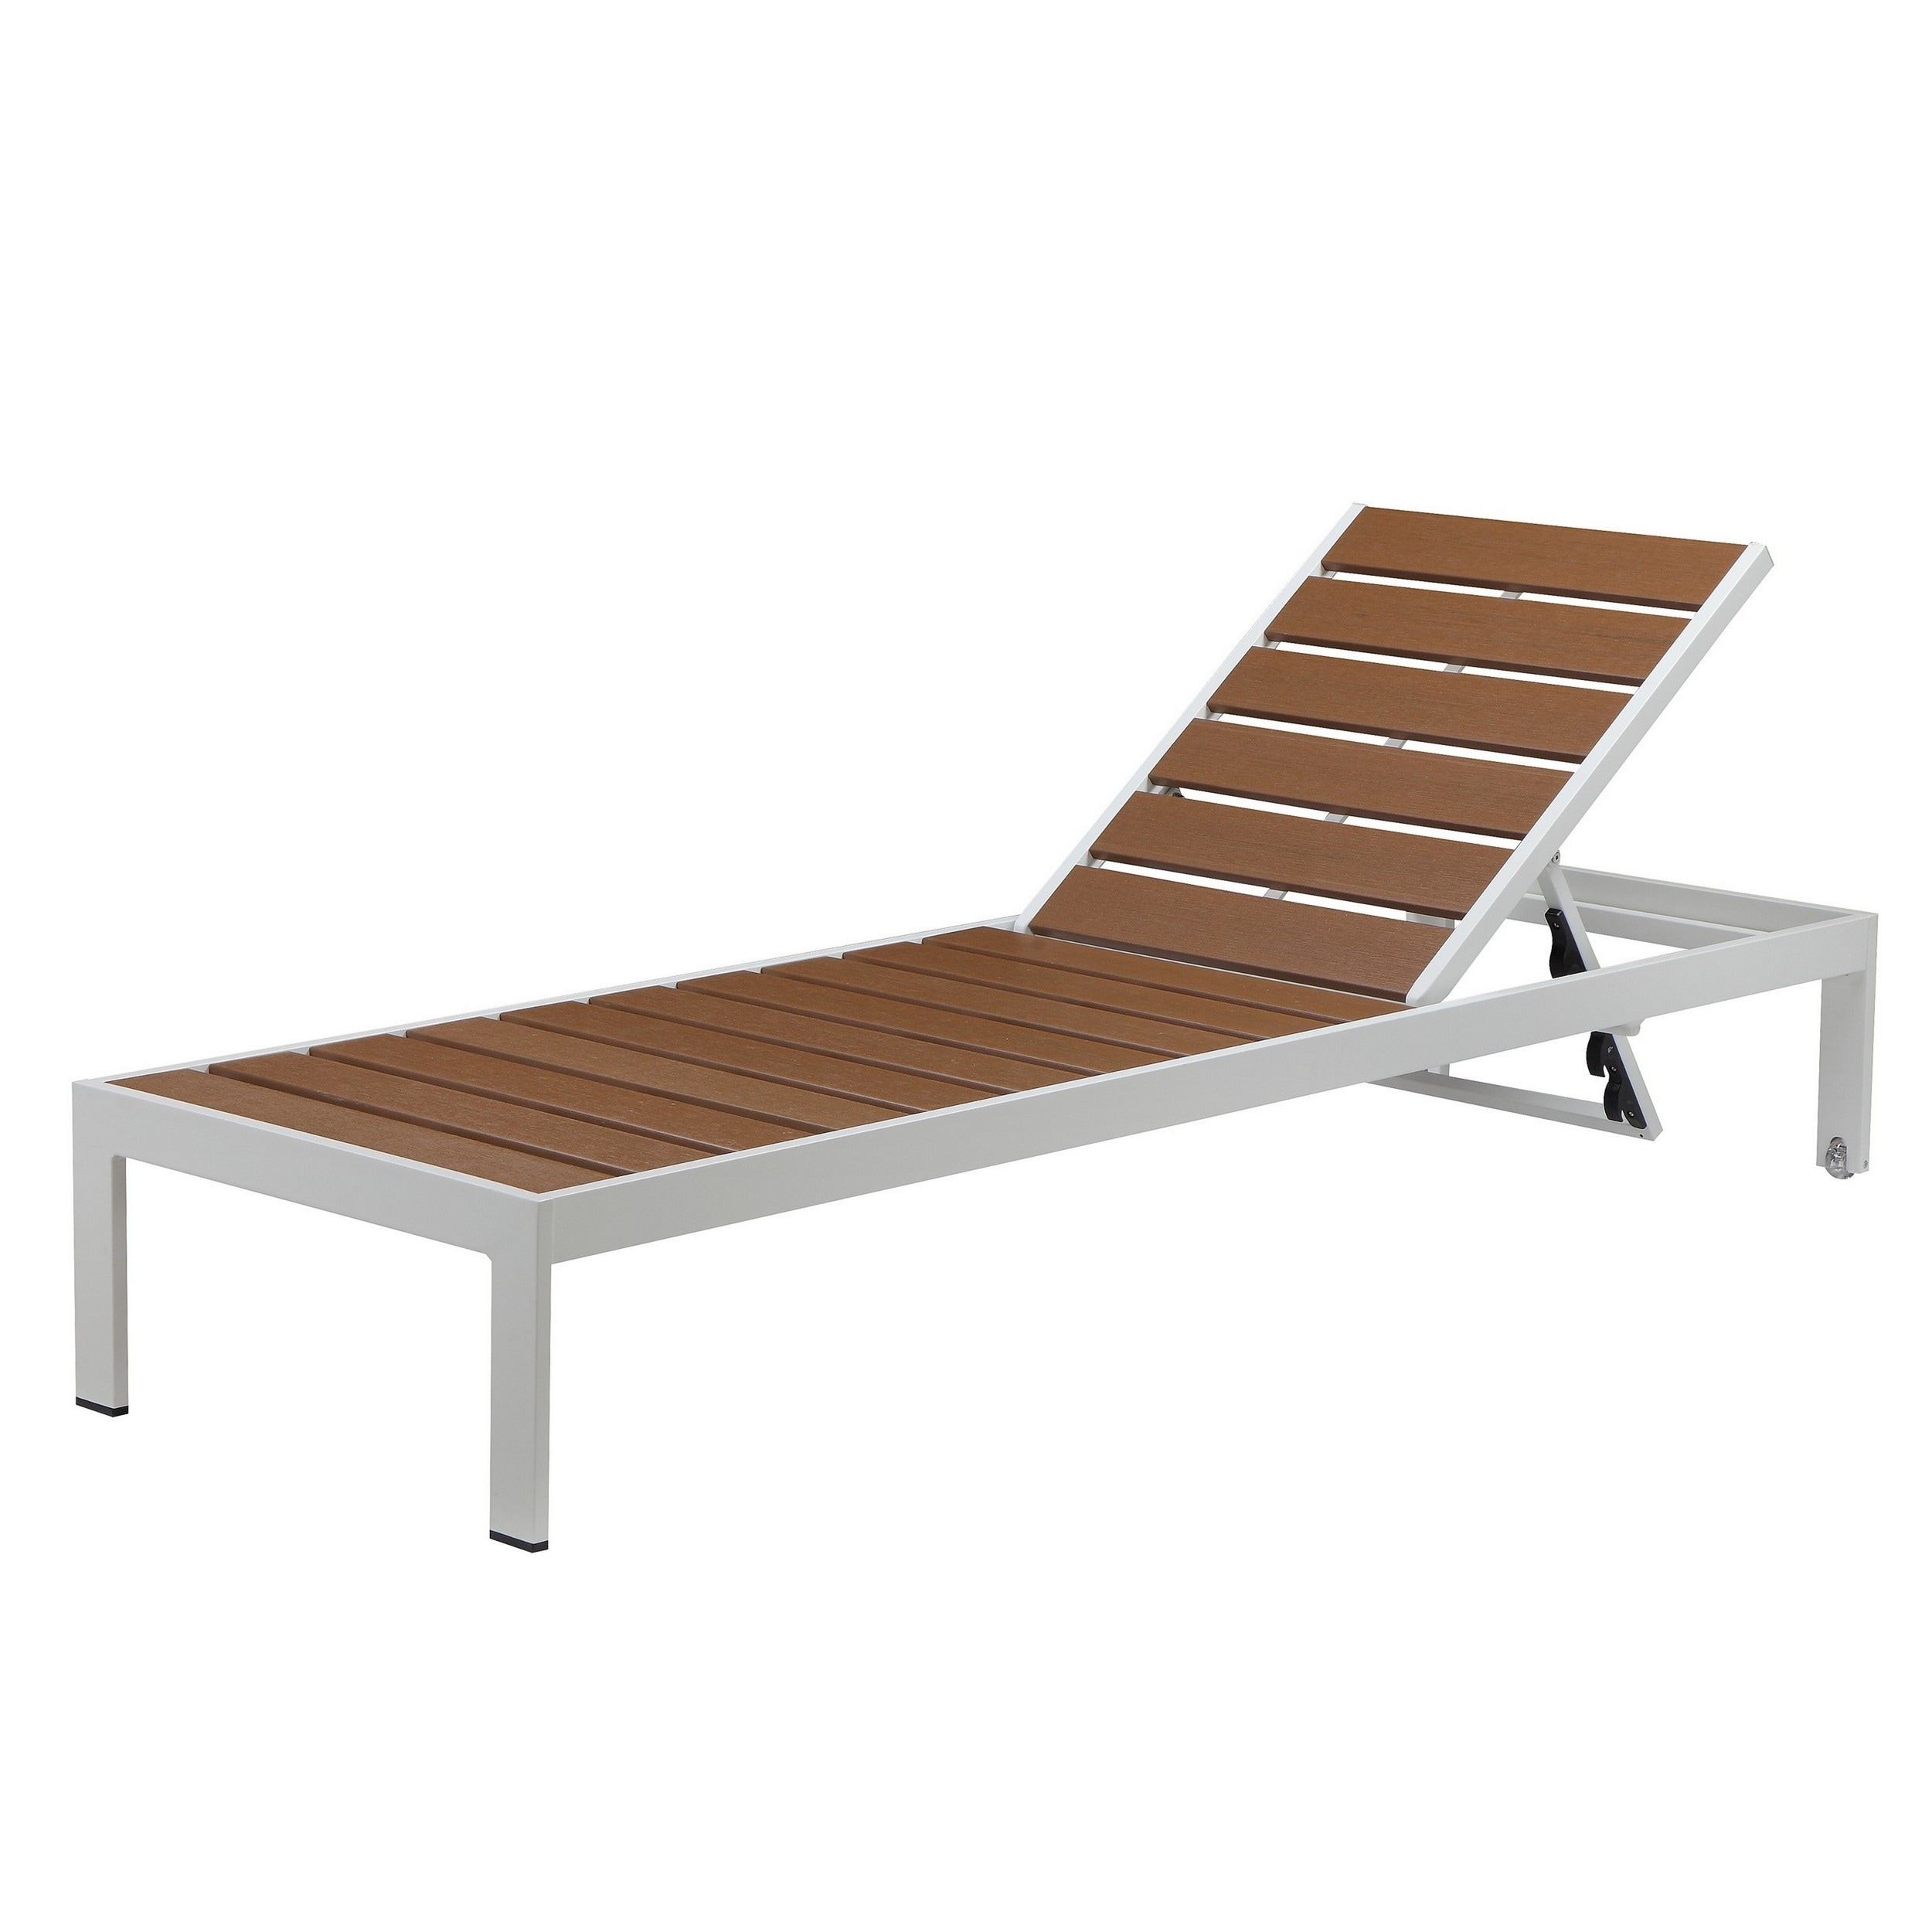 Josh 76 Inch Outdoor Chaise Lounger  White Aluminum Frame  Adjustable Back